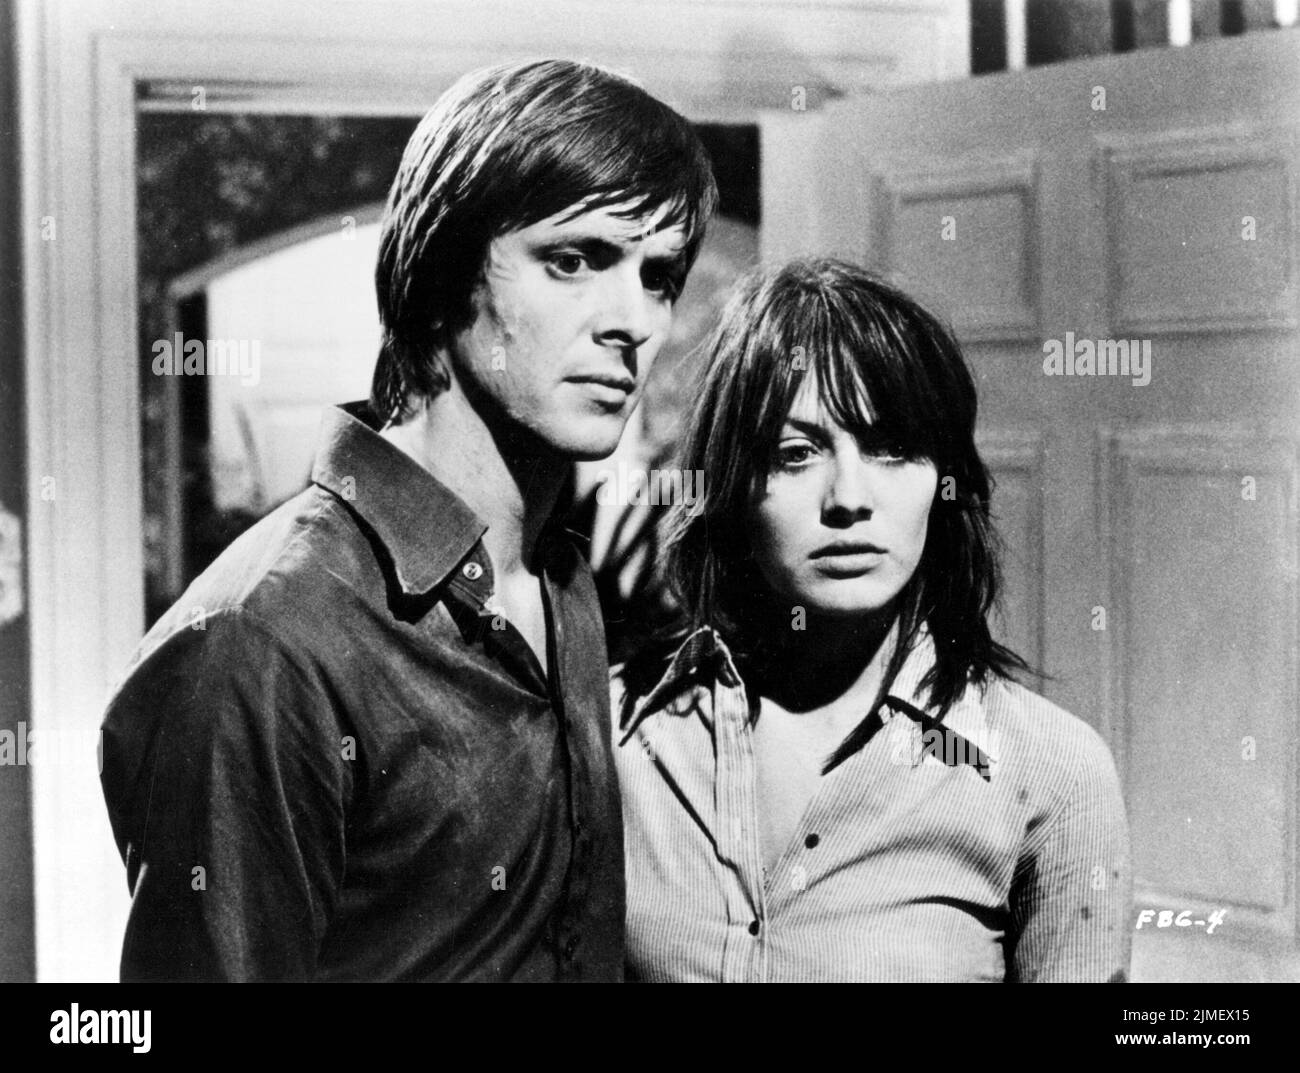 LESLEY-ANNE DOWN and IAN OGILVY in FROM BEYOND THE GRAVE (1974), directed by KEVIN CONNOR. Credit: AMICUS PRODUCTIONS / Album Stock Photo